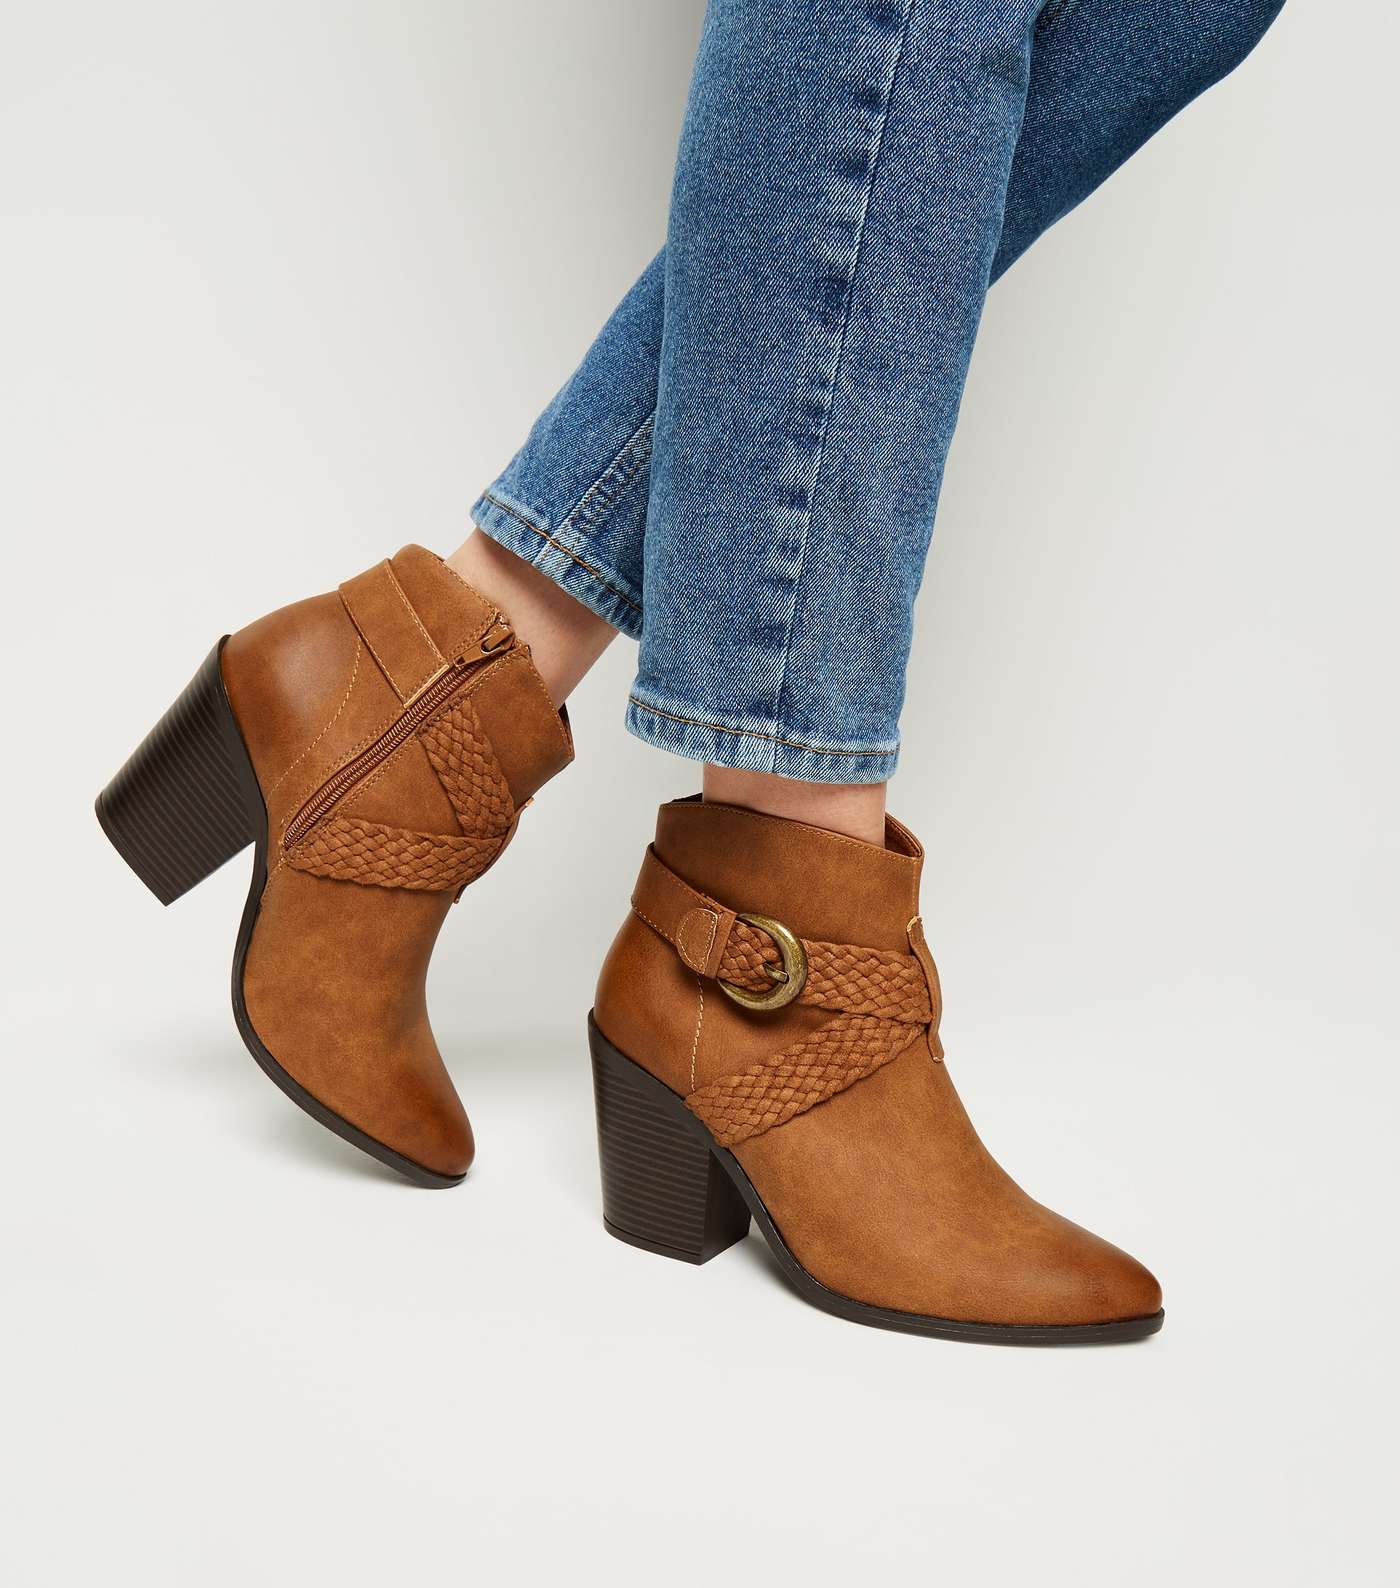 Tan Woven Strap Heeled Western Boots Image 2